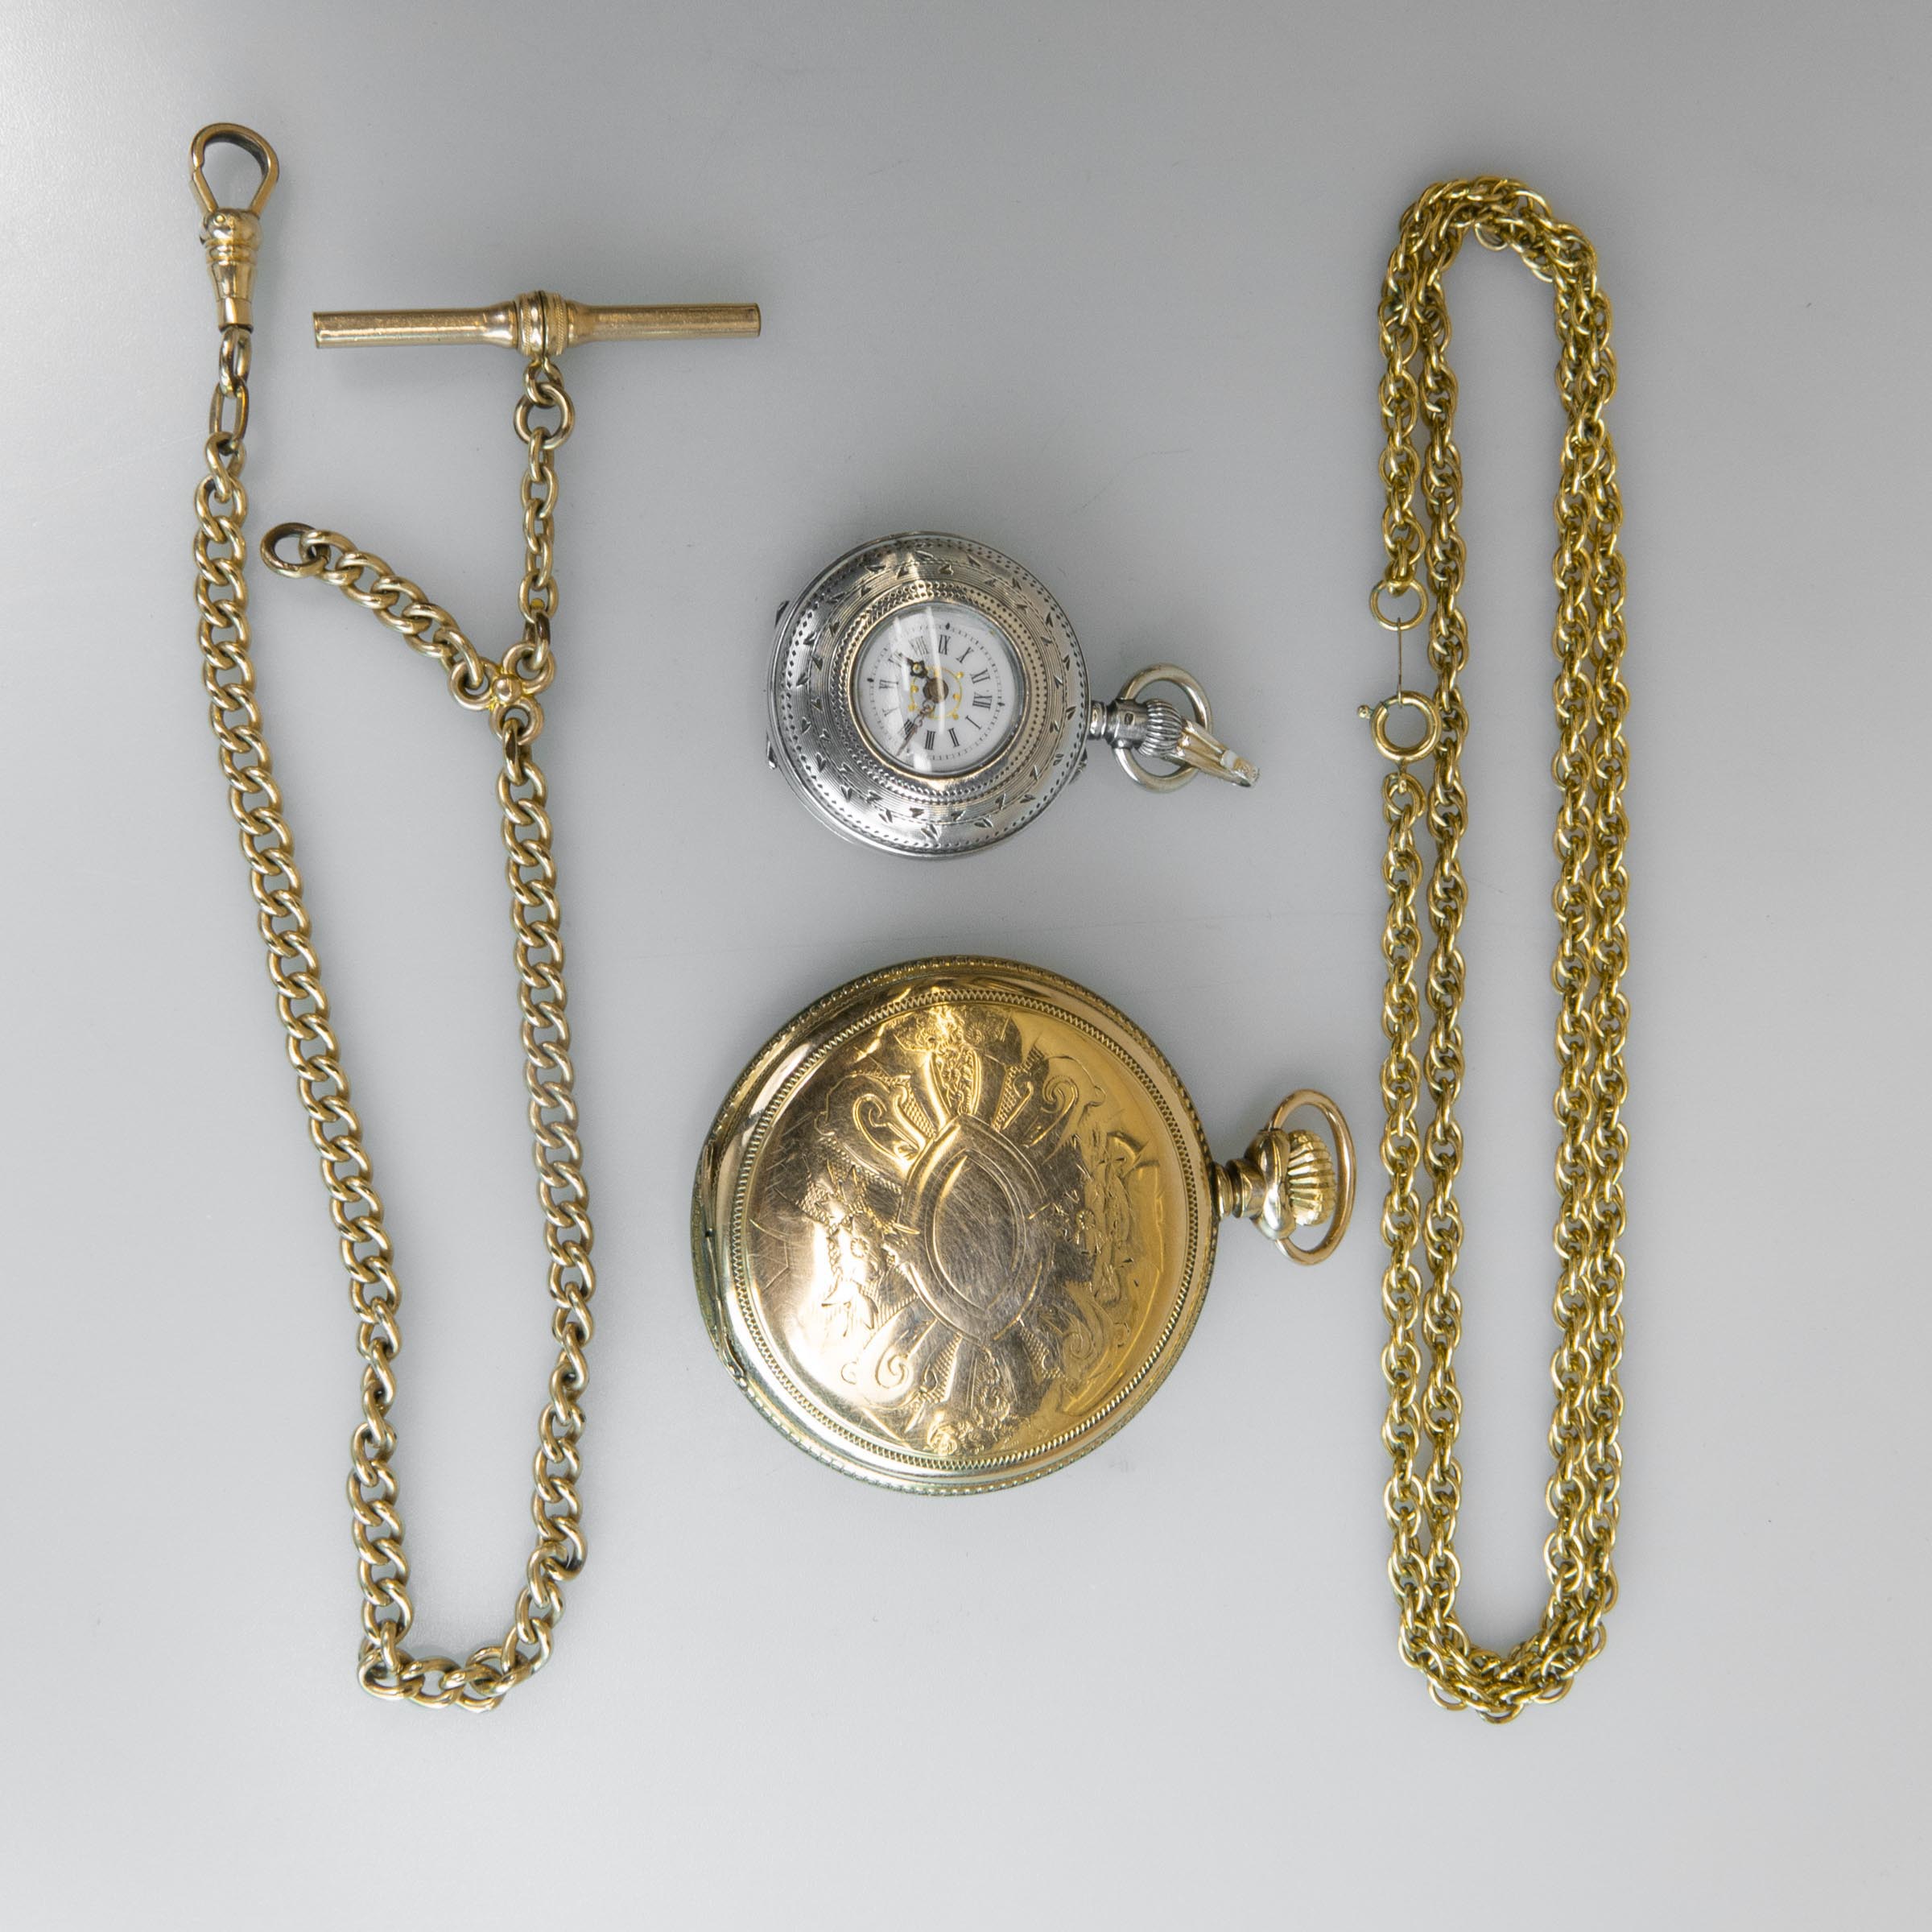 Two Pocket Watches And Chains